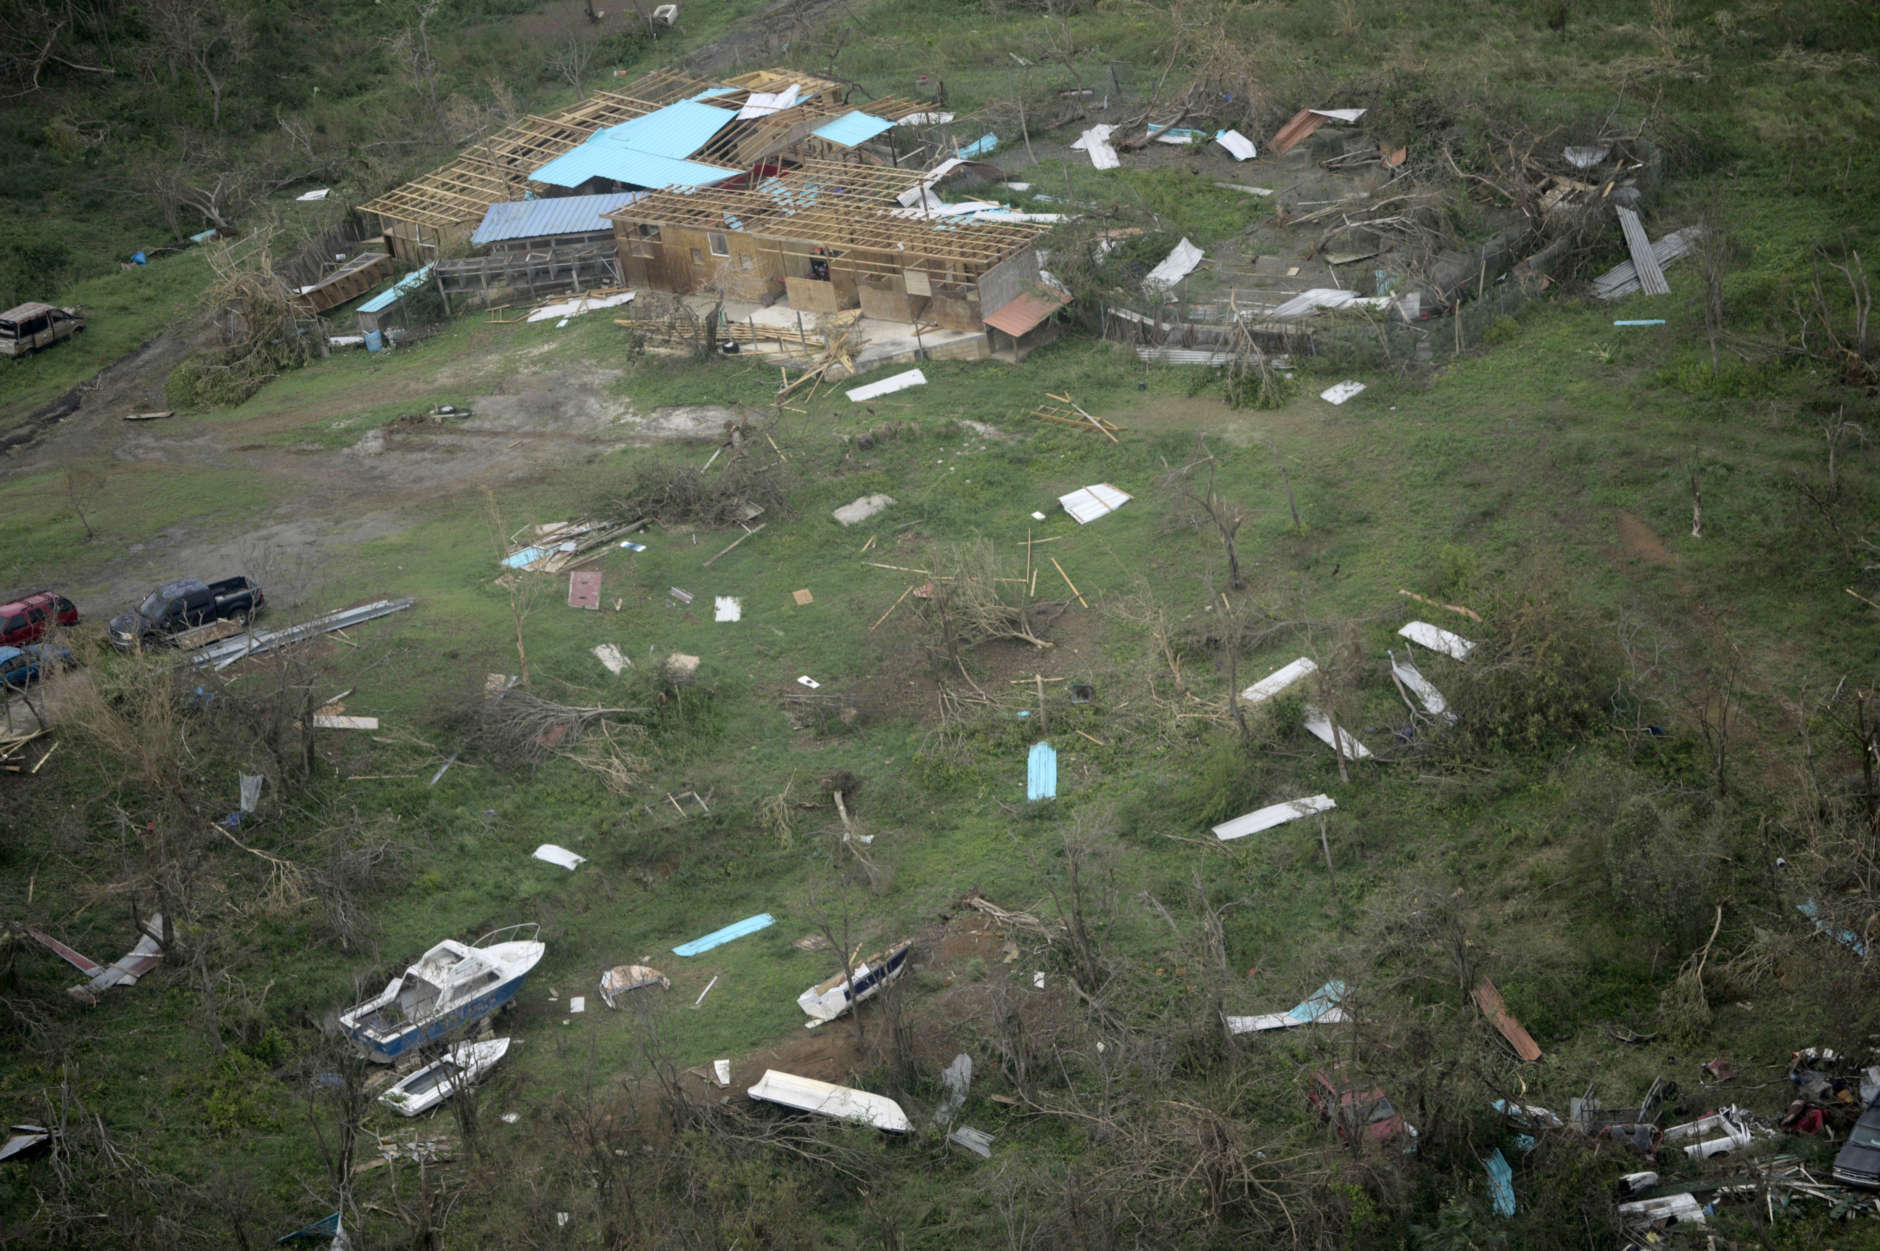 Devastated buildings from the island of Culebra, which suffered damages by the passage of Hurricane Irma, are seen form the air, in Puerto Rico, Thursday, Sept. 7, 2017. About a million people were without power in the U.S. territory after Irma passed just to the north, lashing the island with heavy wind and rain. Nearly 50,000 also were without water. (AP Photo/Carlos Giusti)